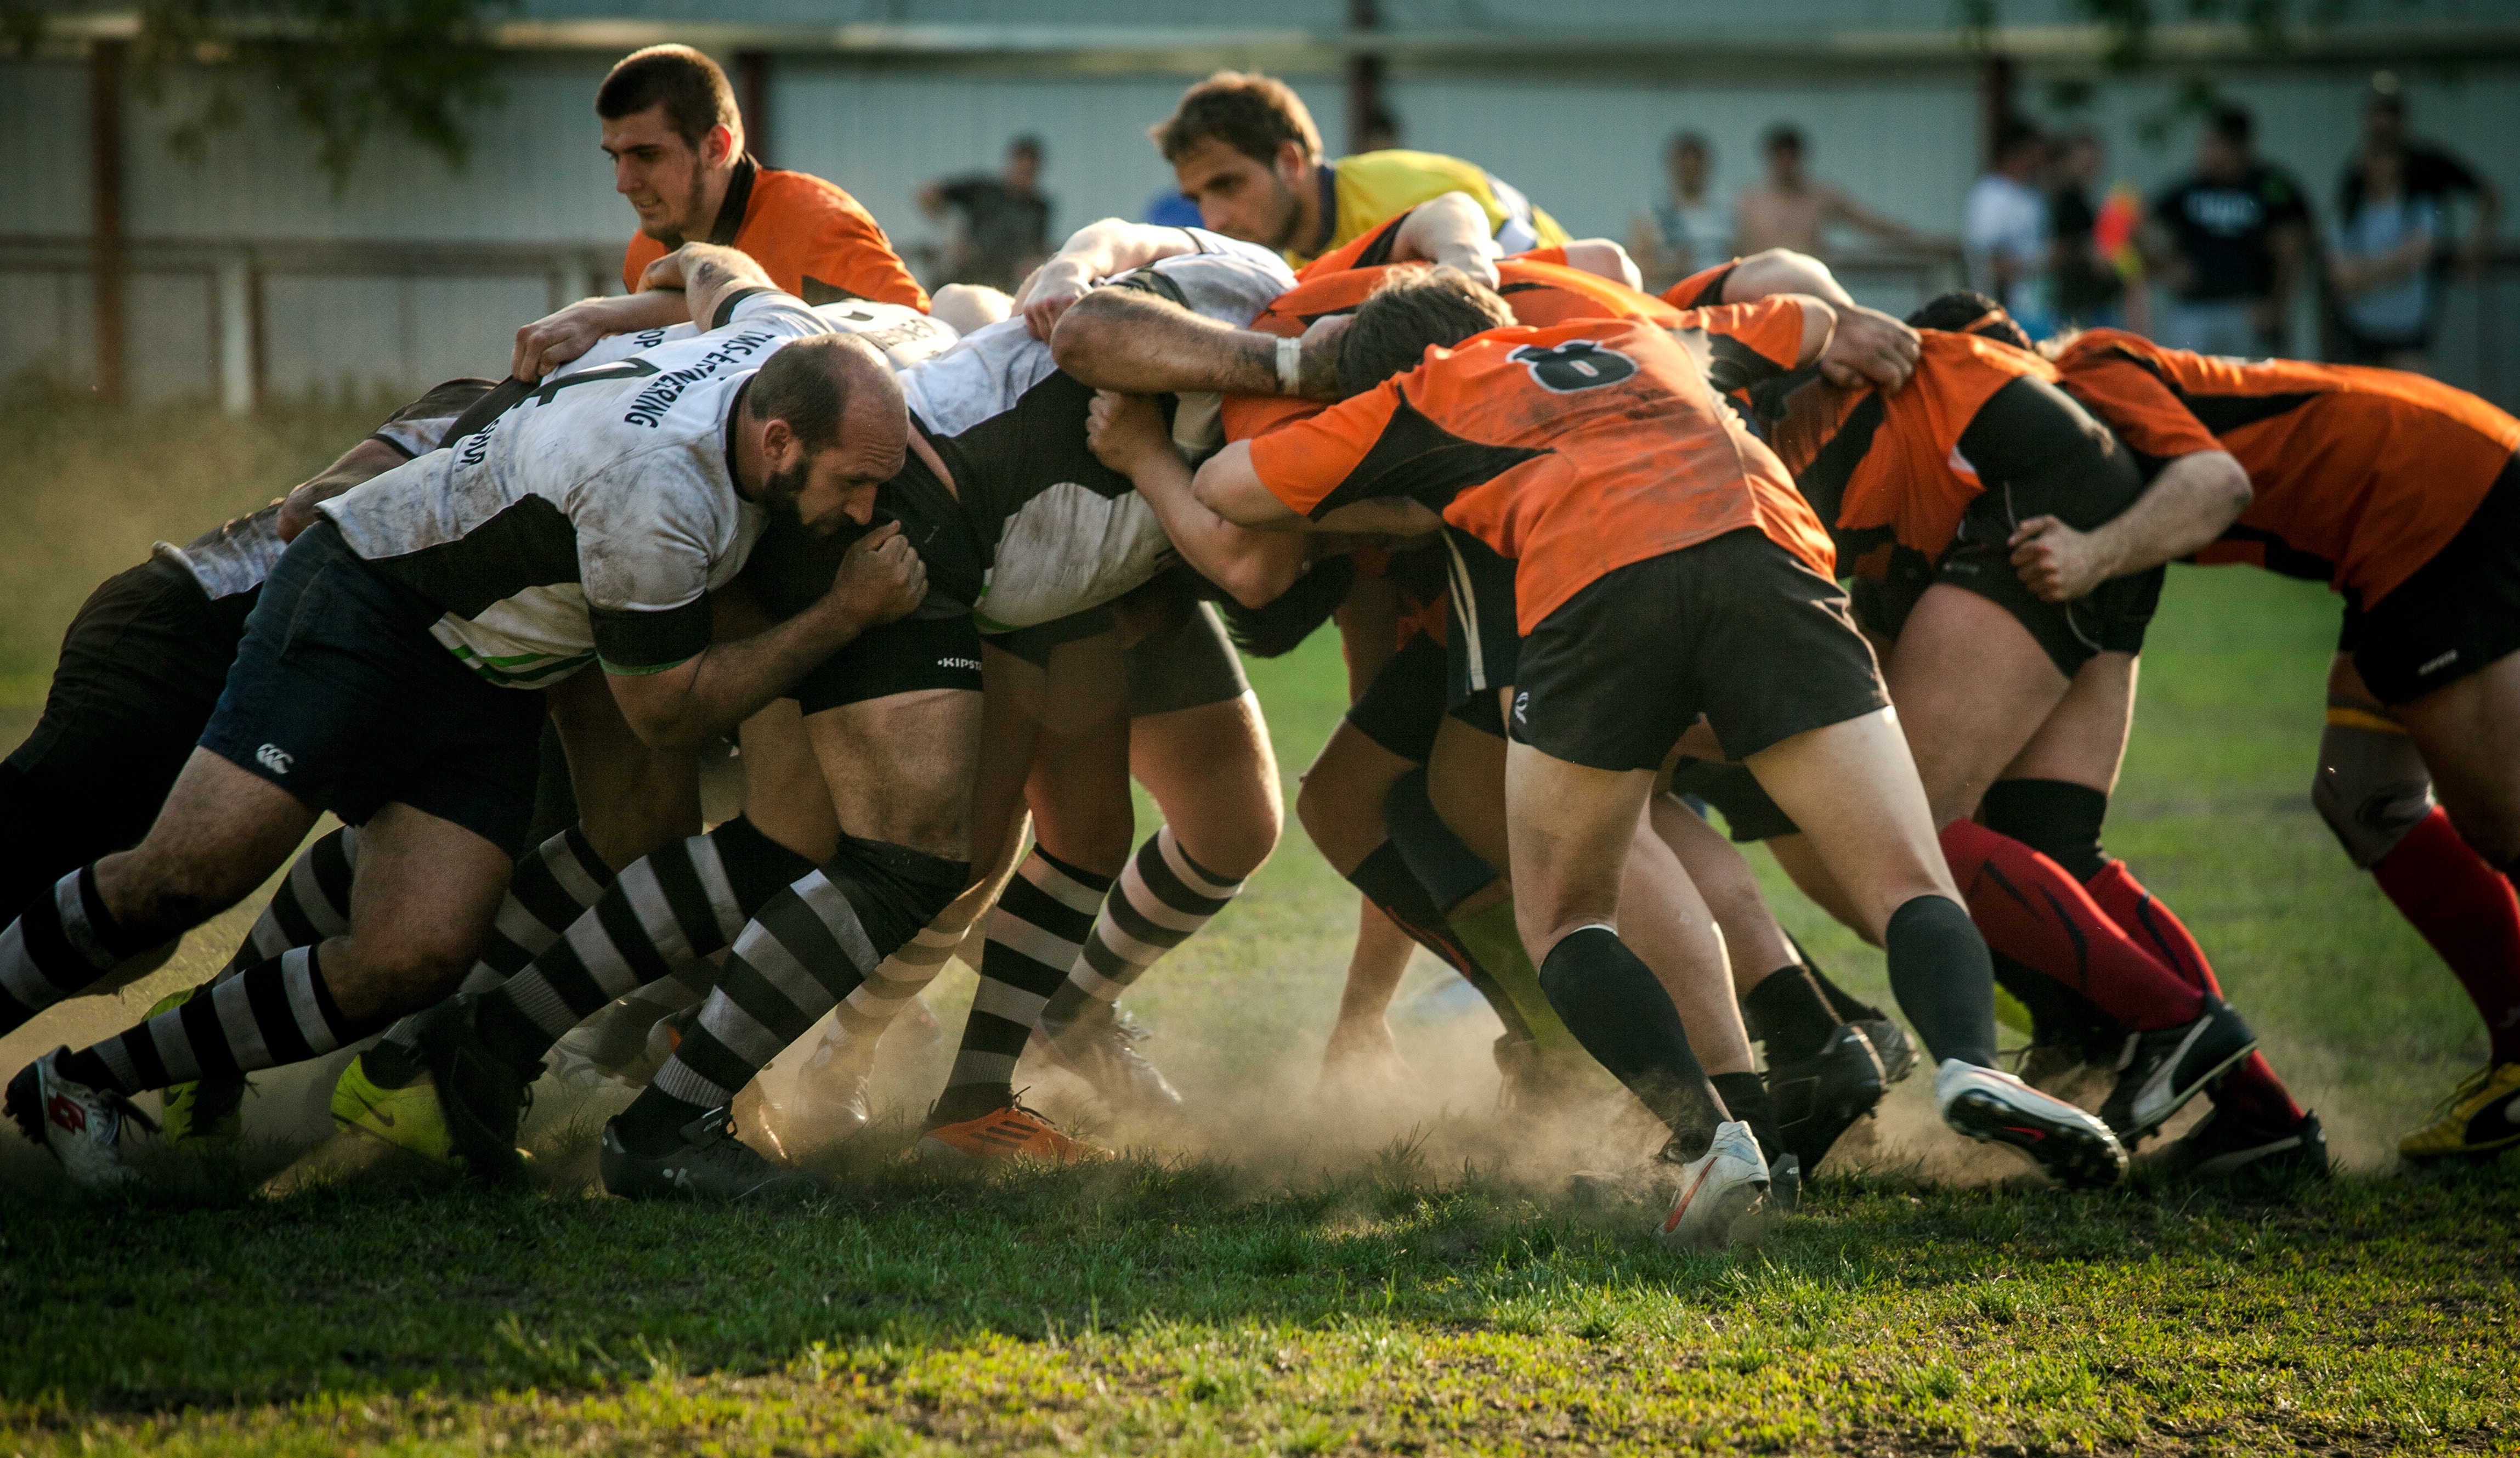 An image of people playing rugby